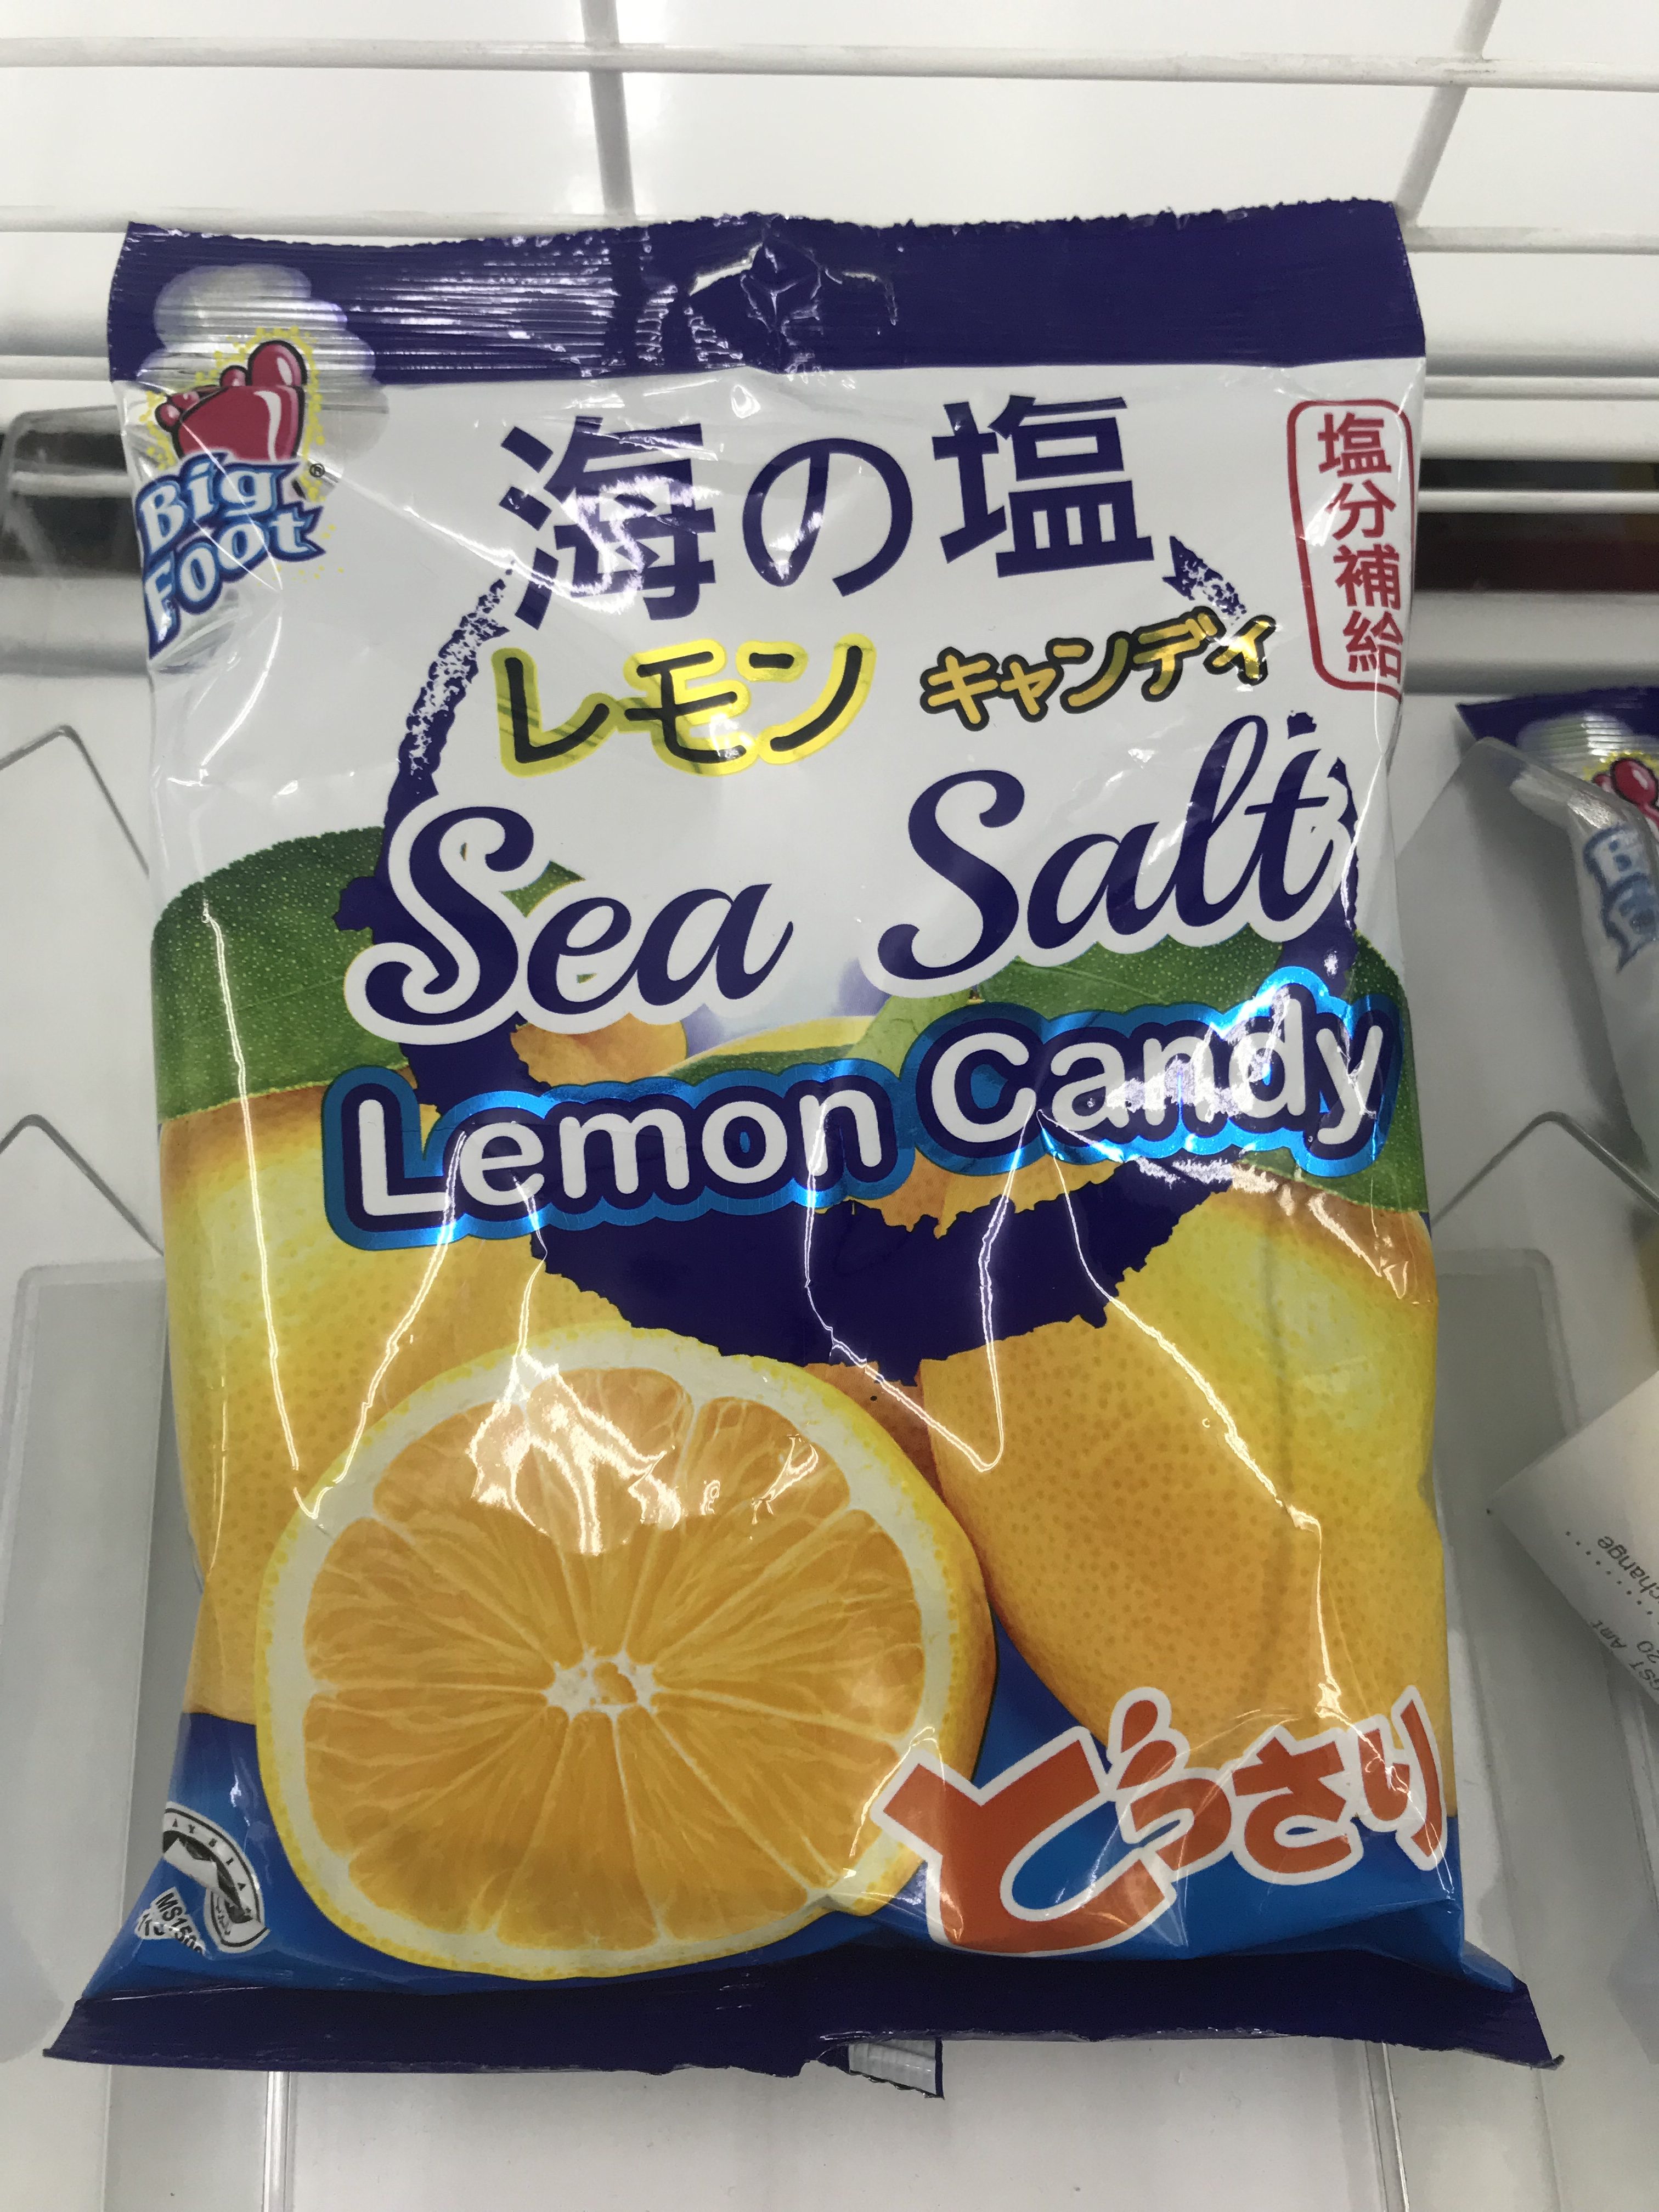 Big Foot Sea Salt Lemon Candy now available at Giant Singapore for $2 - 2